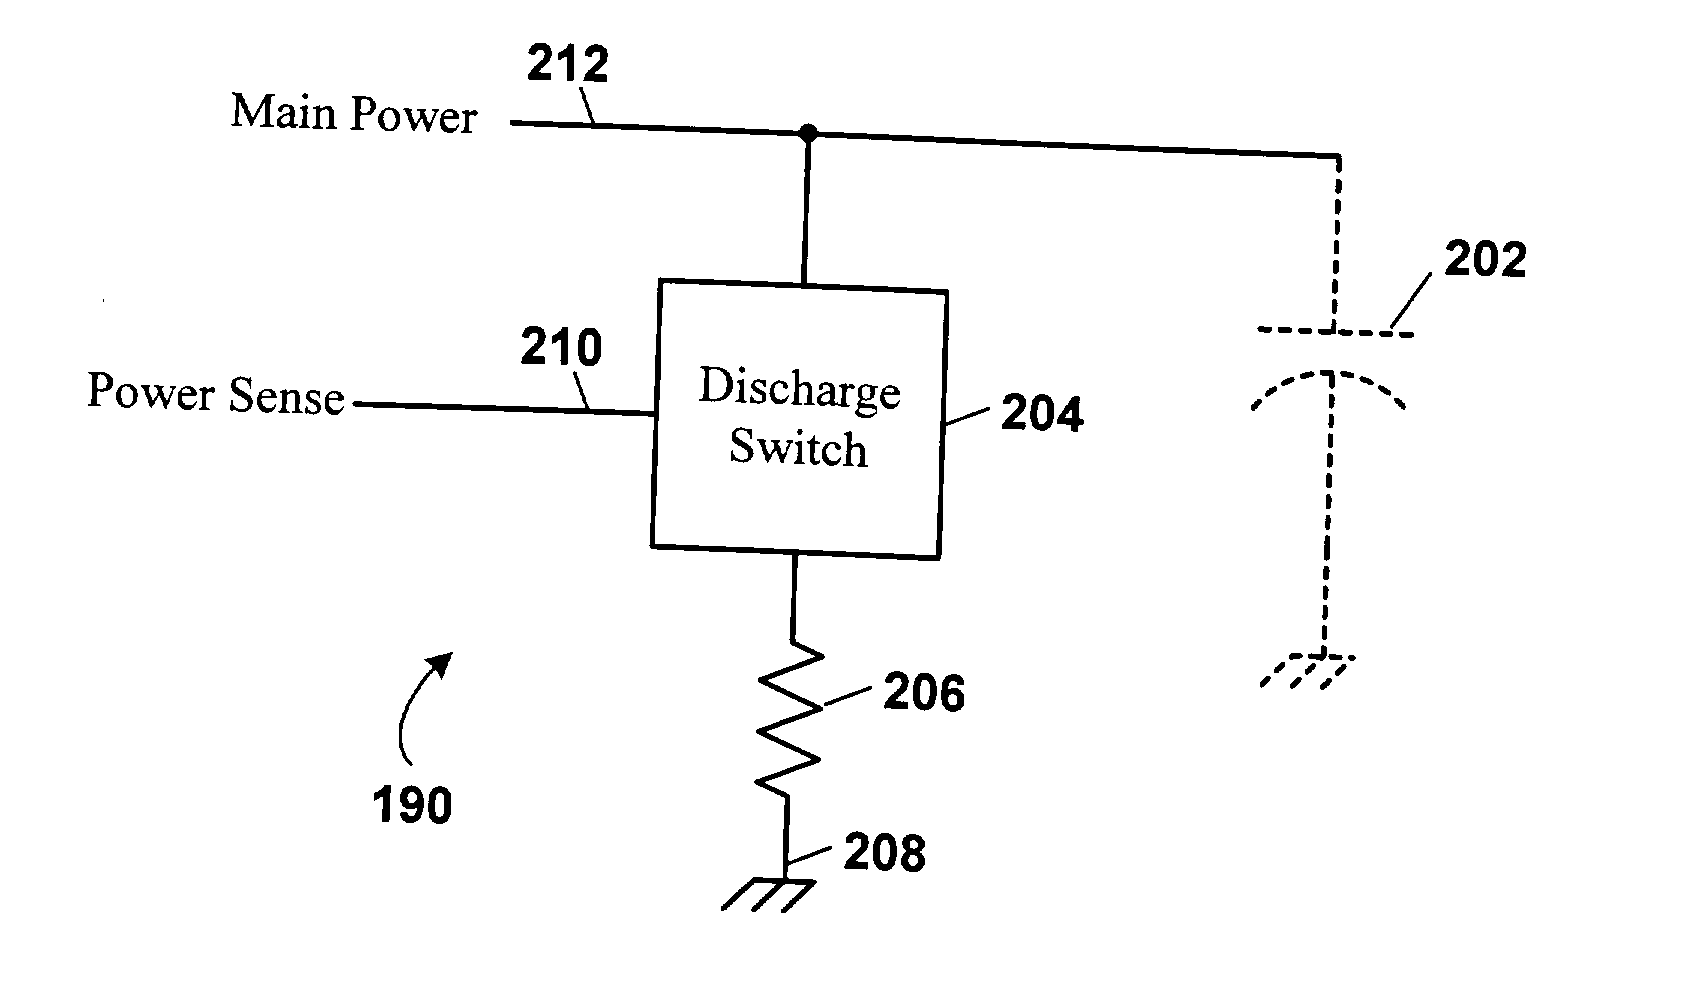 Draining residual power from a voltage plane